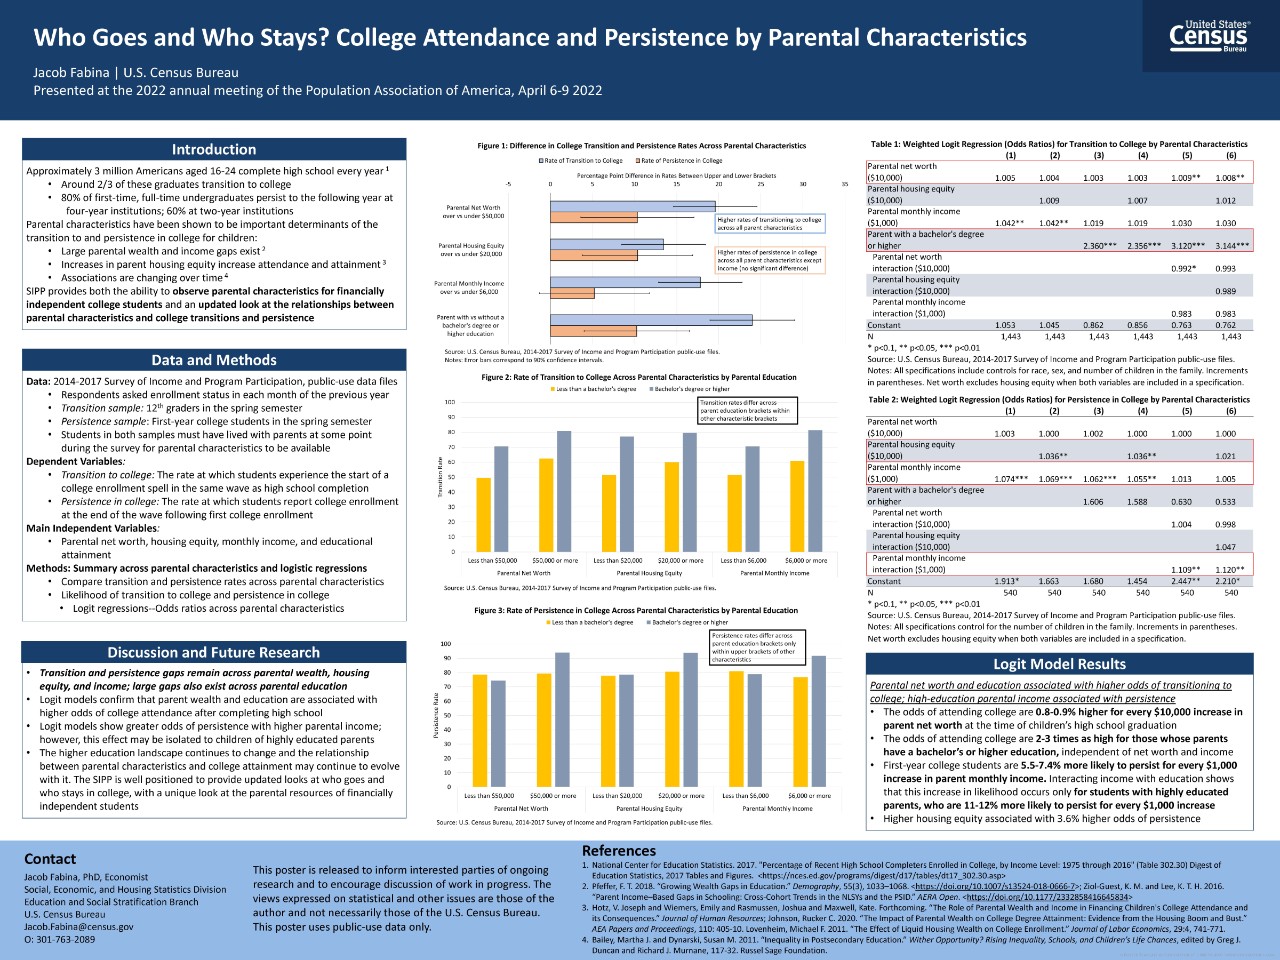 Who Goes and Who Stays? College Attendance and Persistence by Parental Characteristics